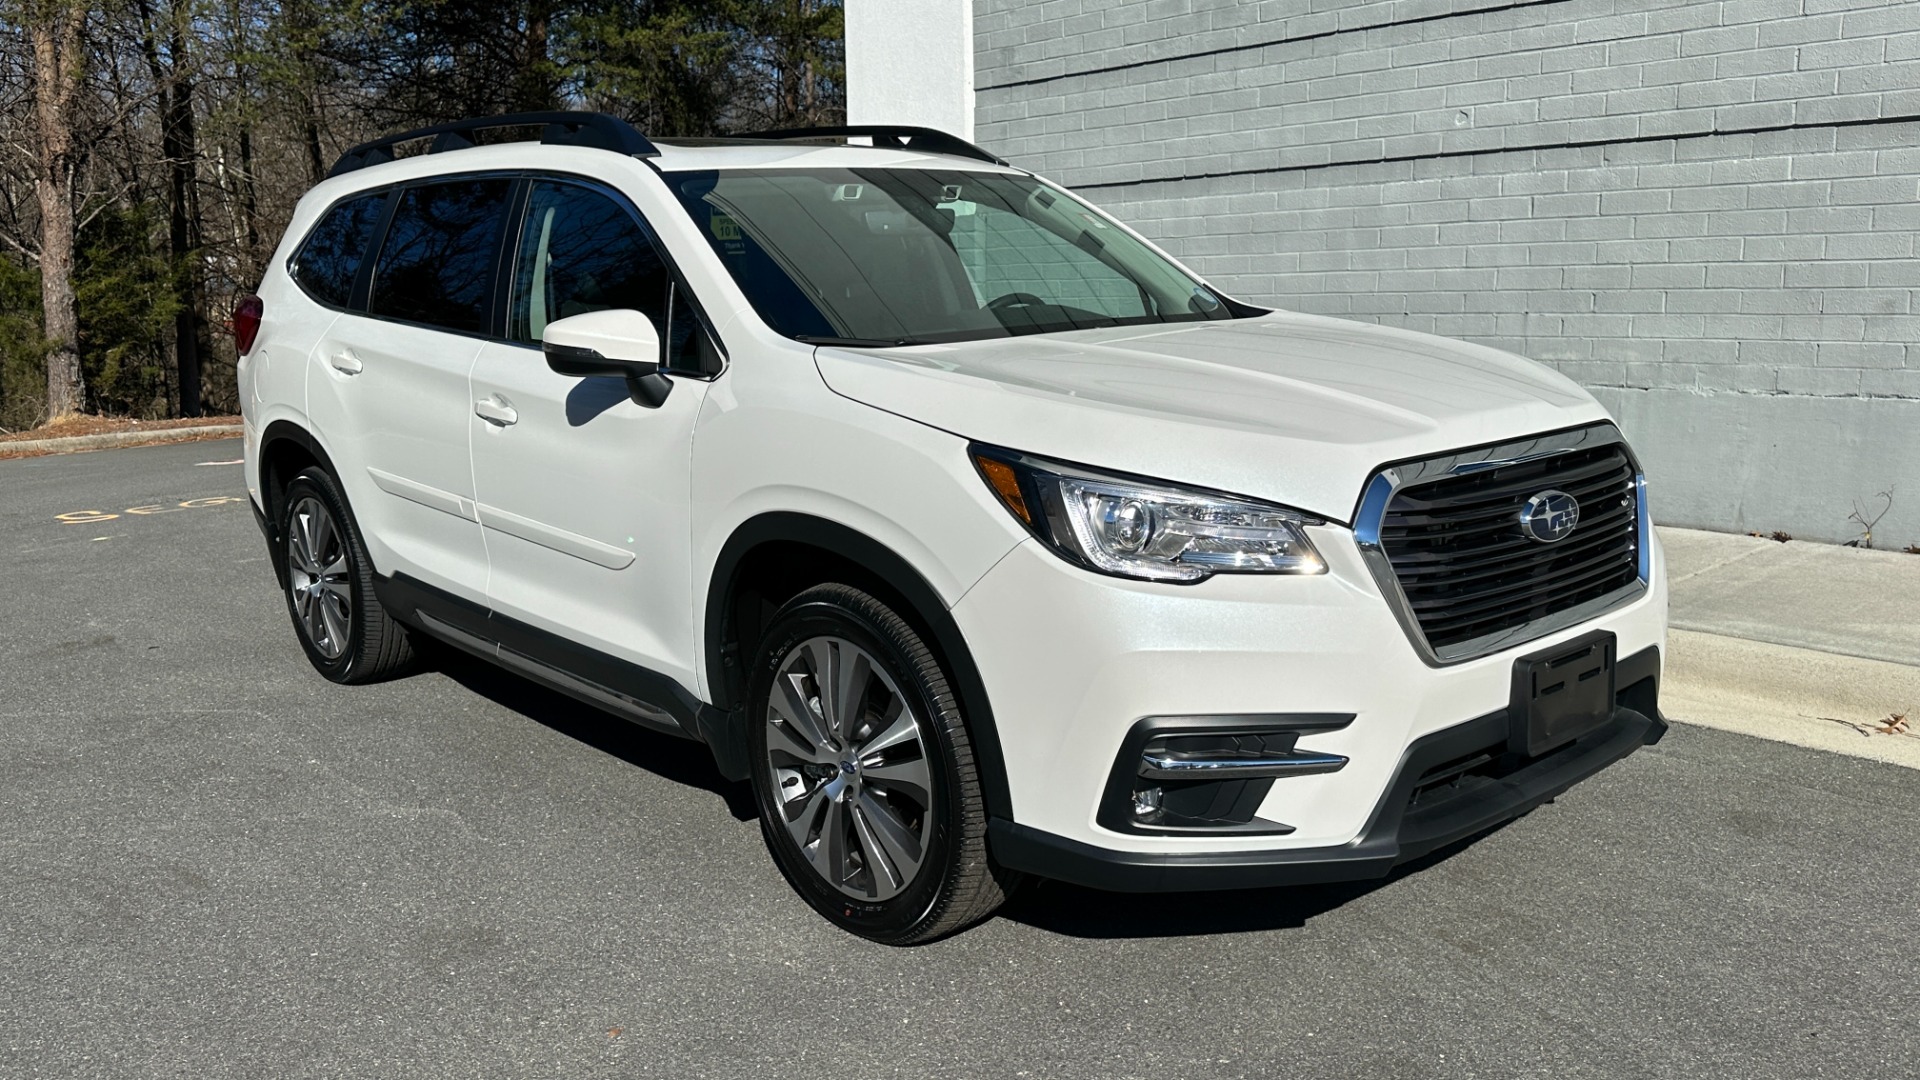 Used 2021 Subaru Ascent LIMITED / DRIVER ASSISTANCE / NAVIGATION / PANORAMIC ROOF / LEATHER for sale $36,995 at Formula Imports in Charlotte NC 28227 2